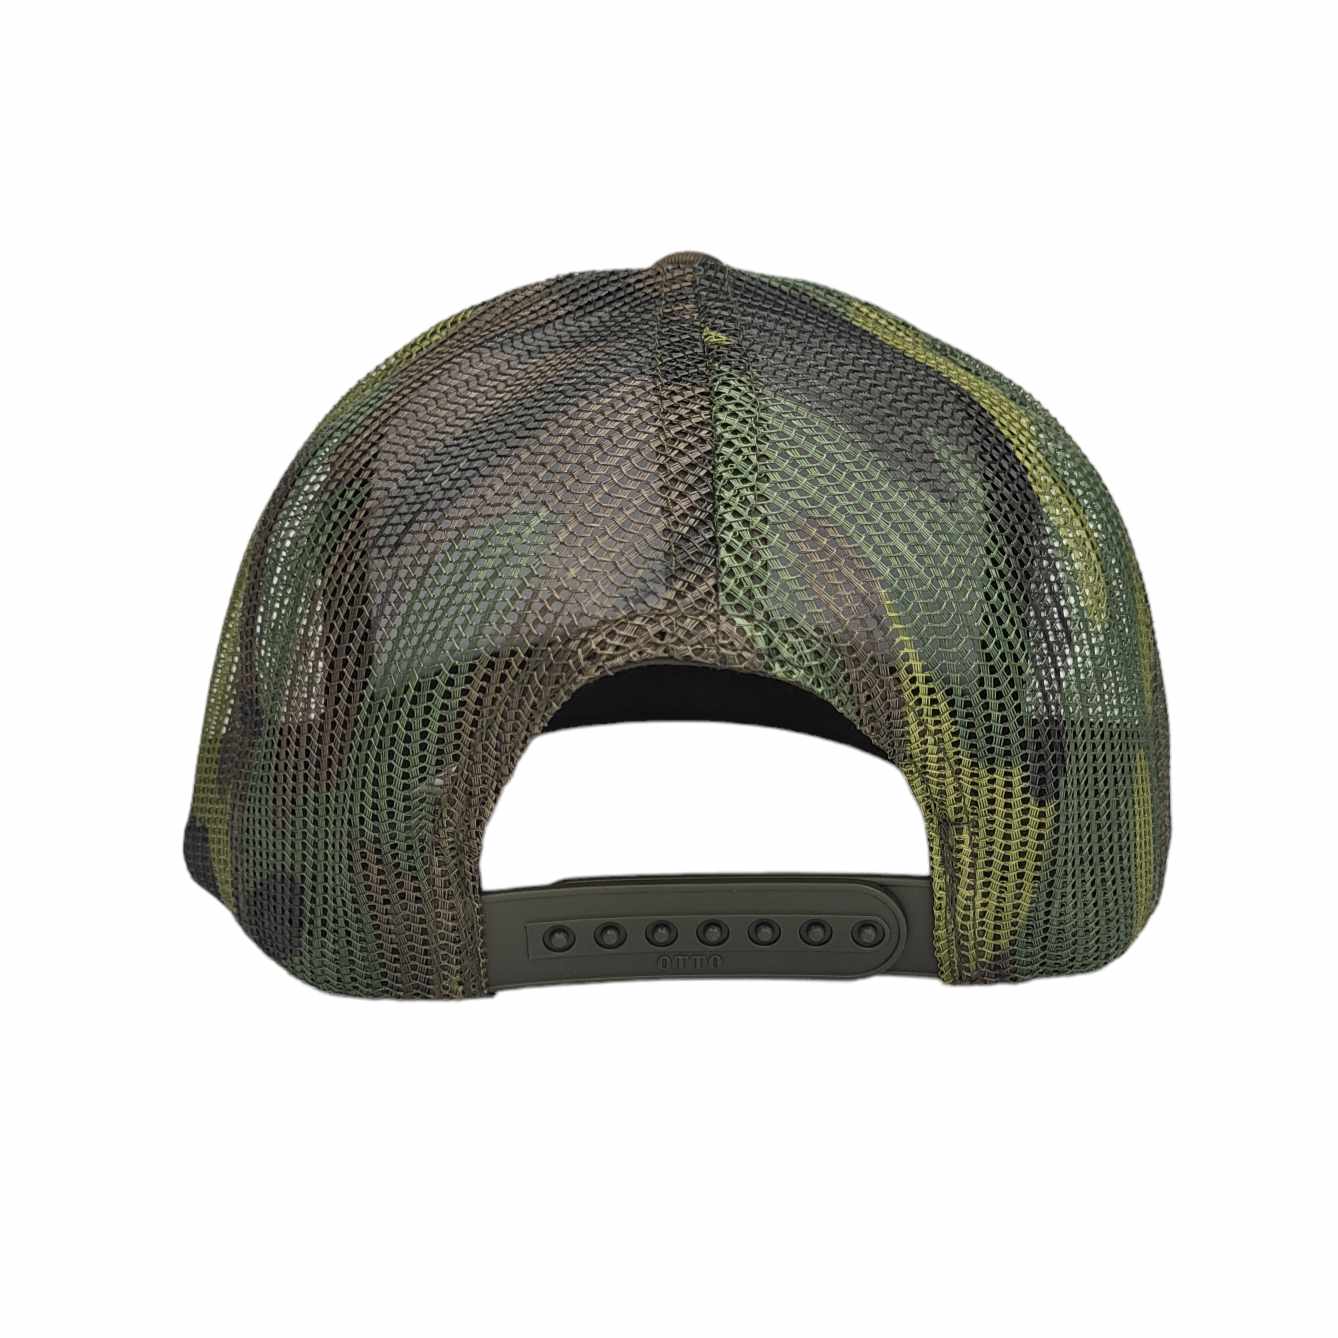 Freshwater Angler Cork Patch Hat